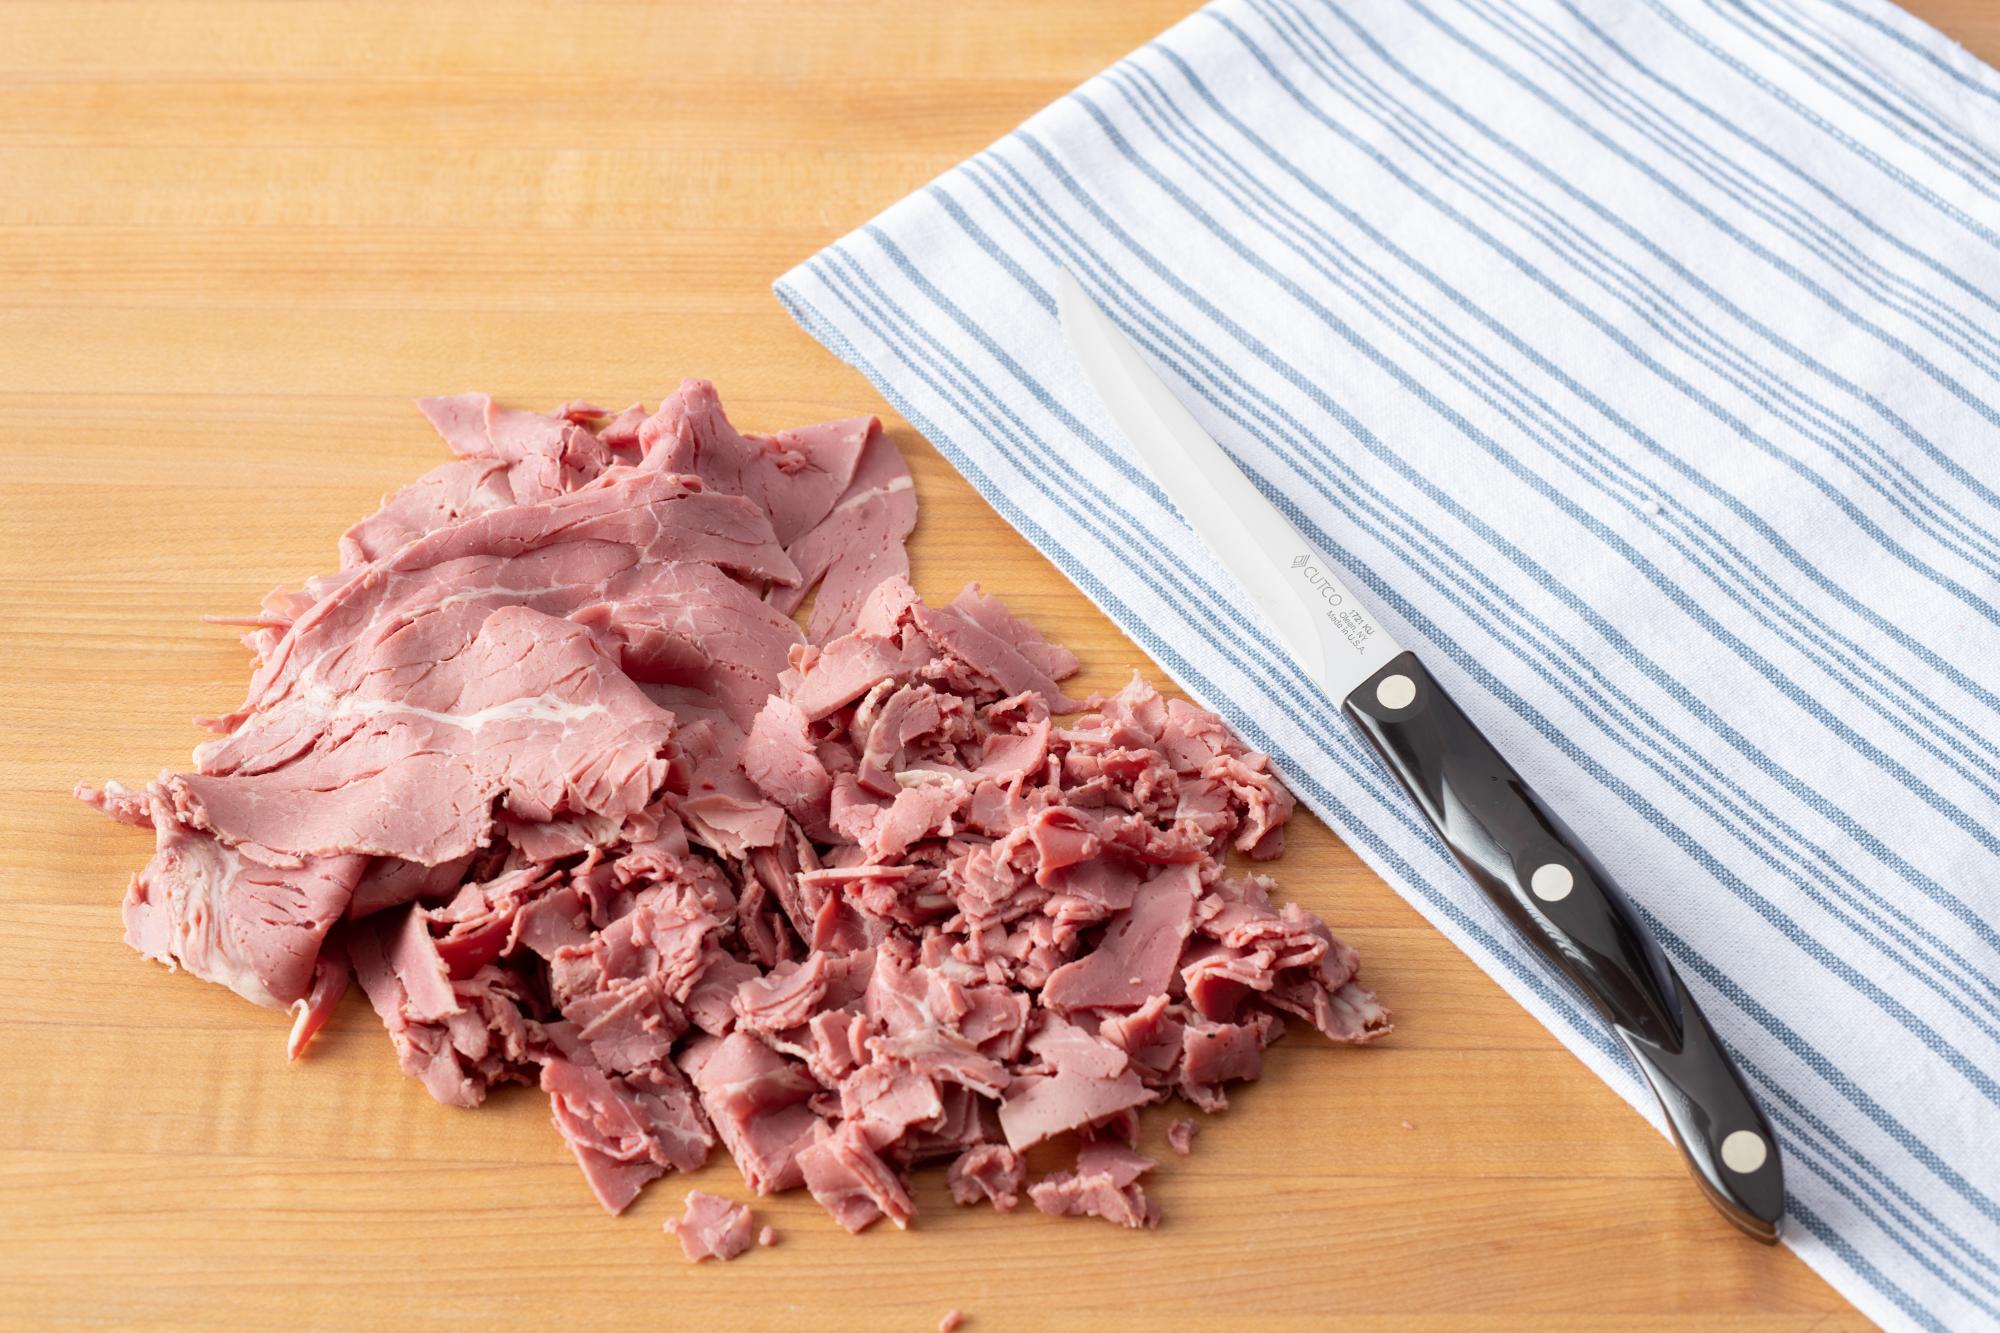 Cut the corned beef with a Trimmer.